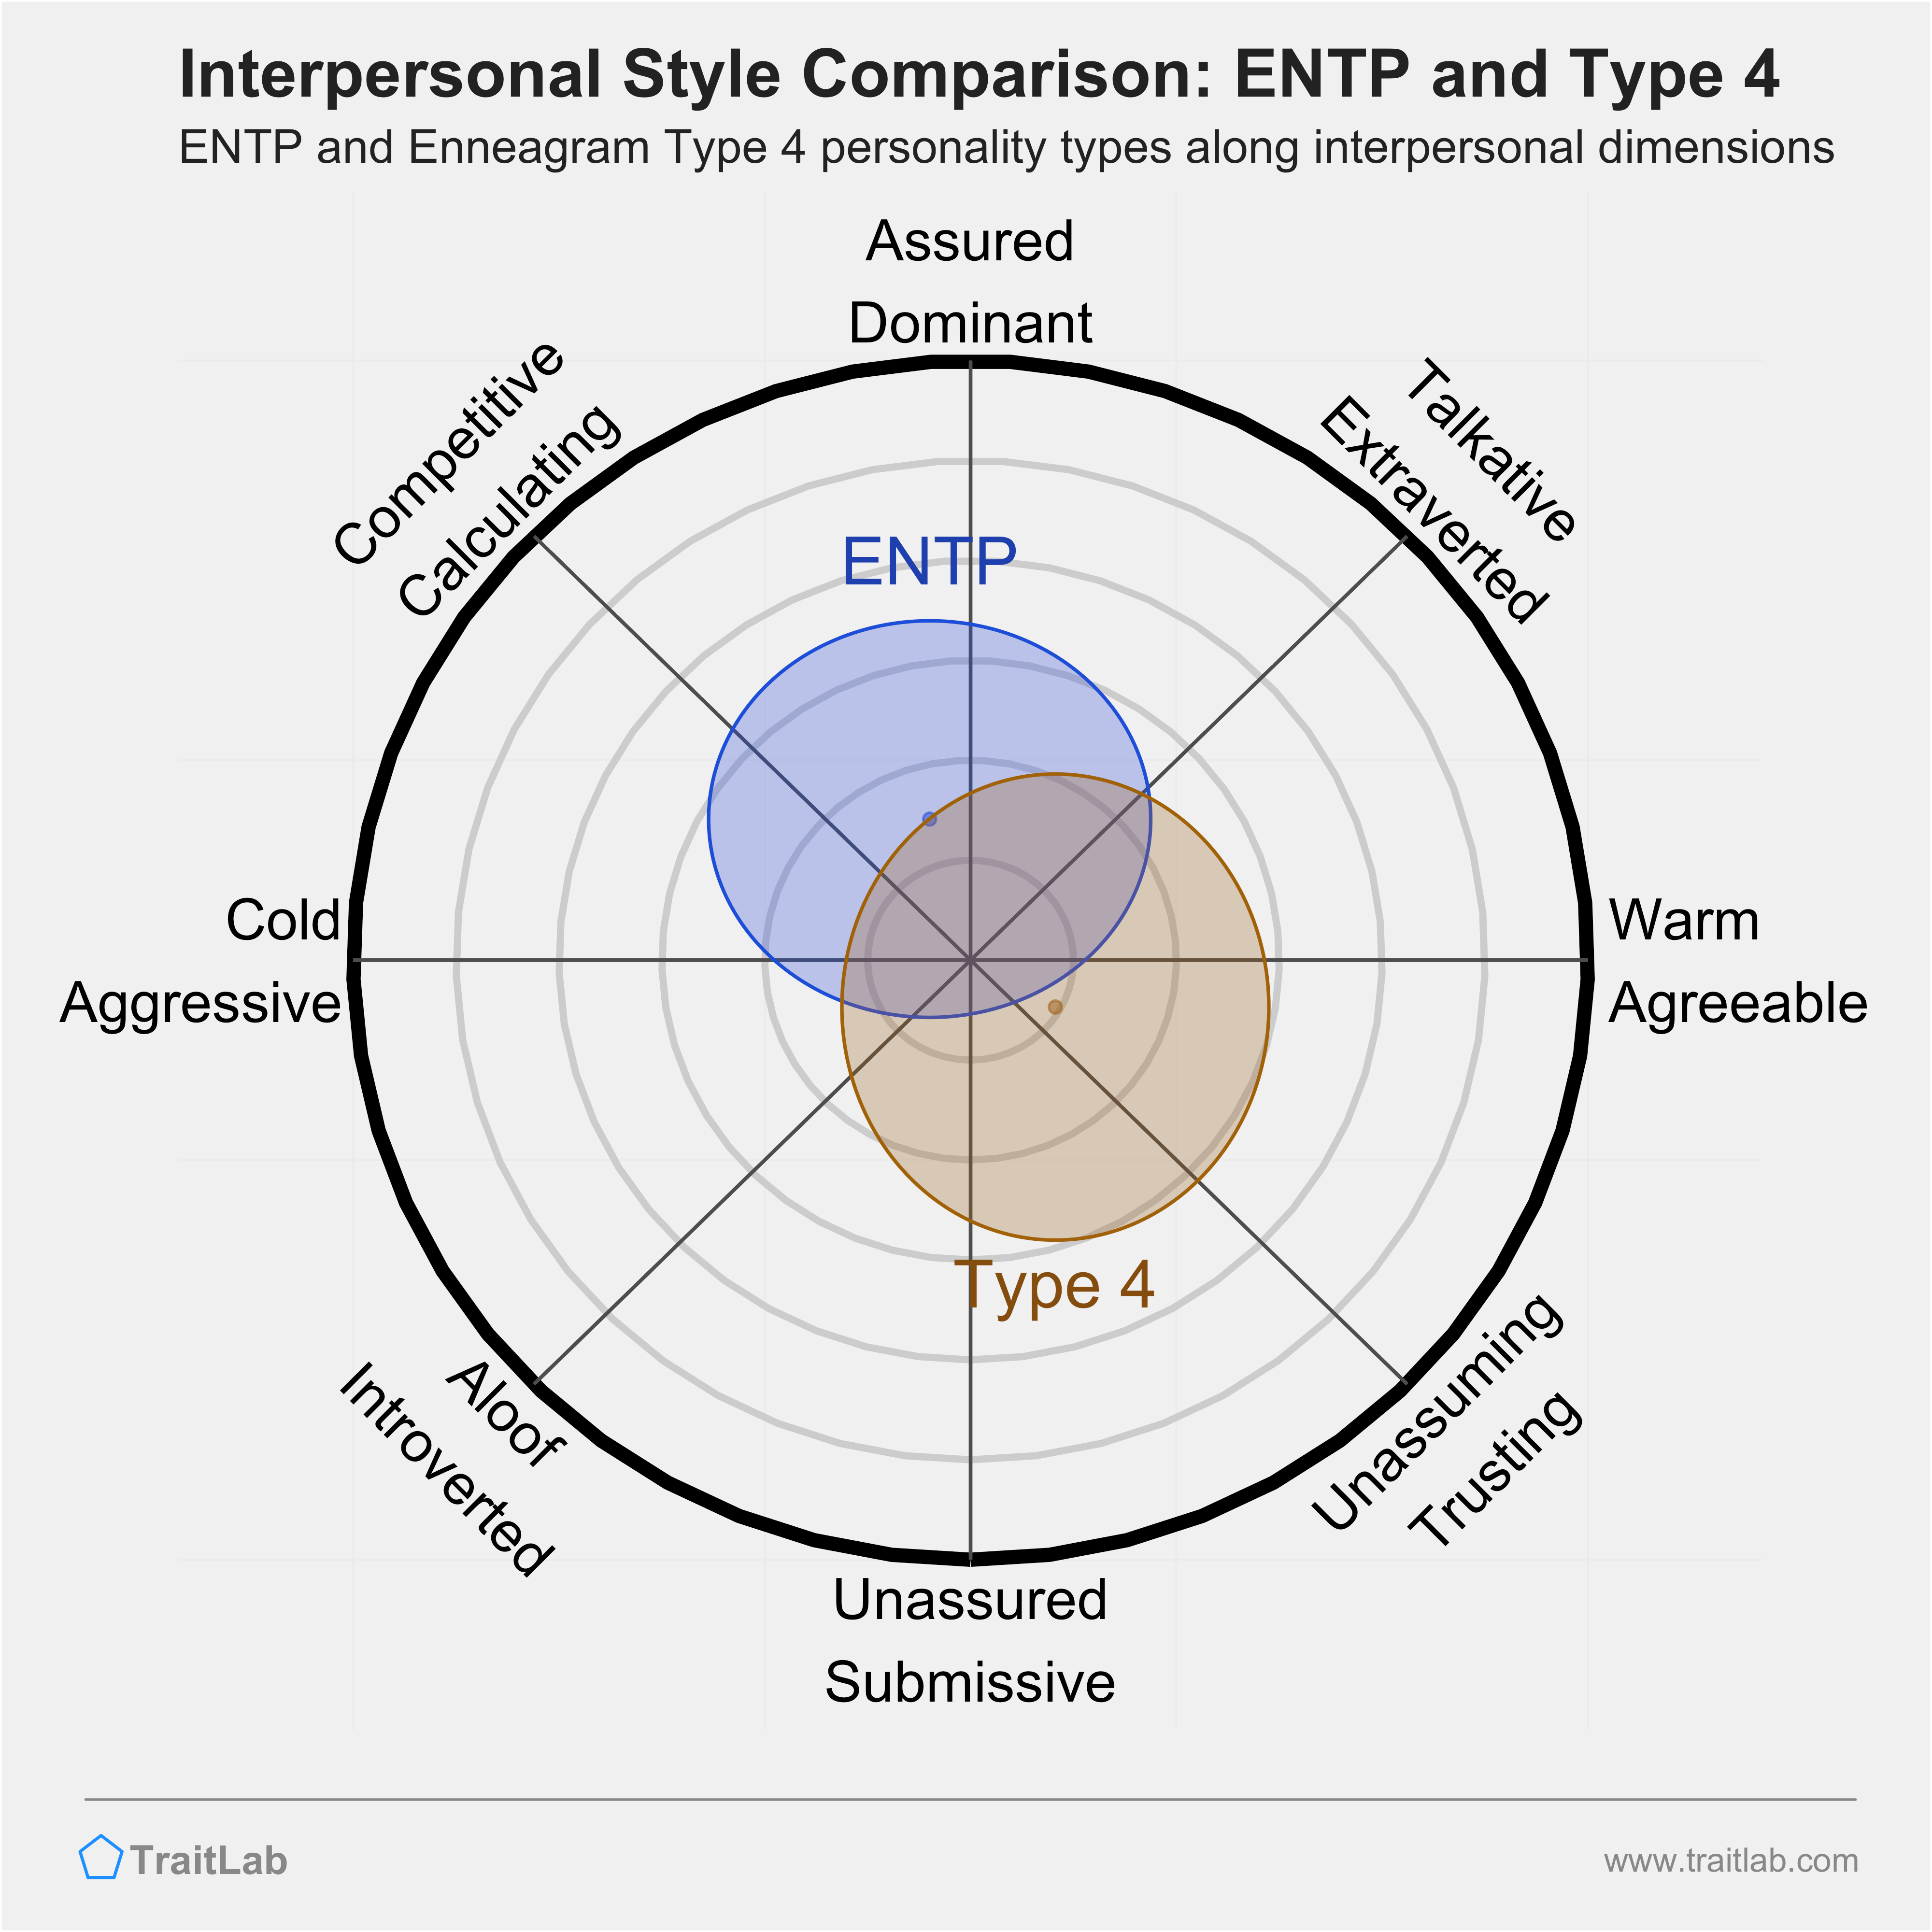 Enneagram ENTP and Type 4 comparison across interpersonal dimensions